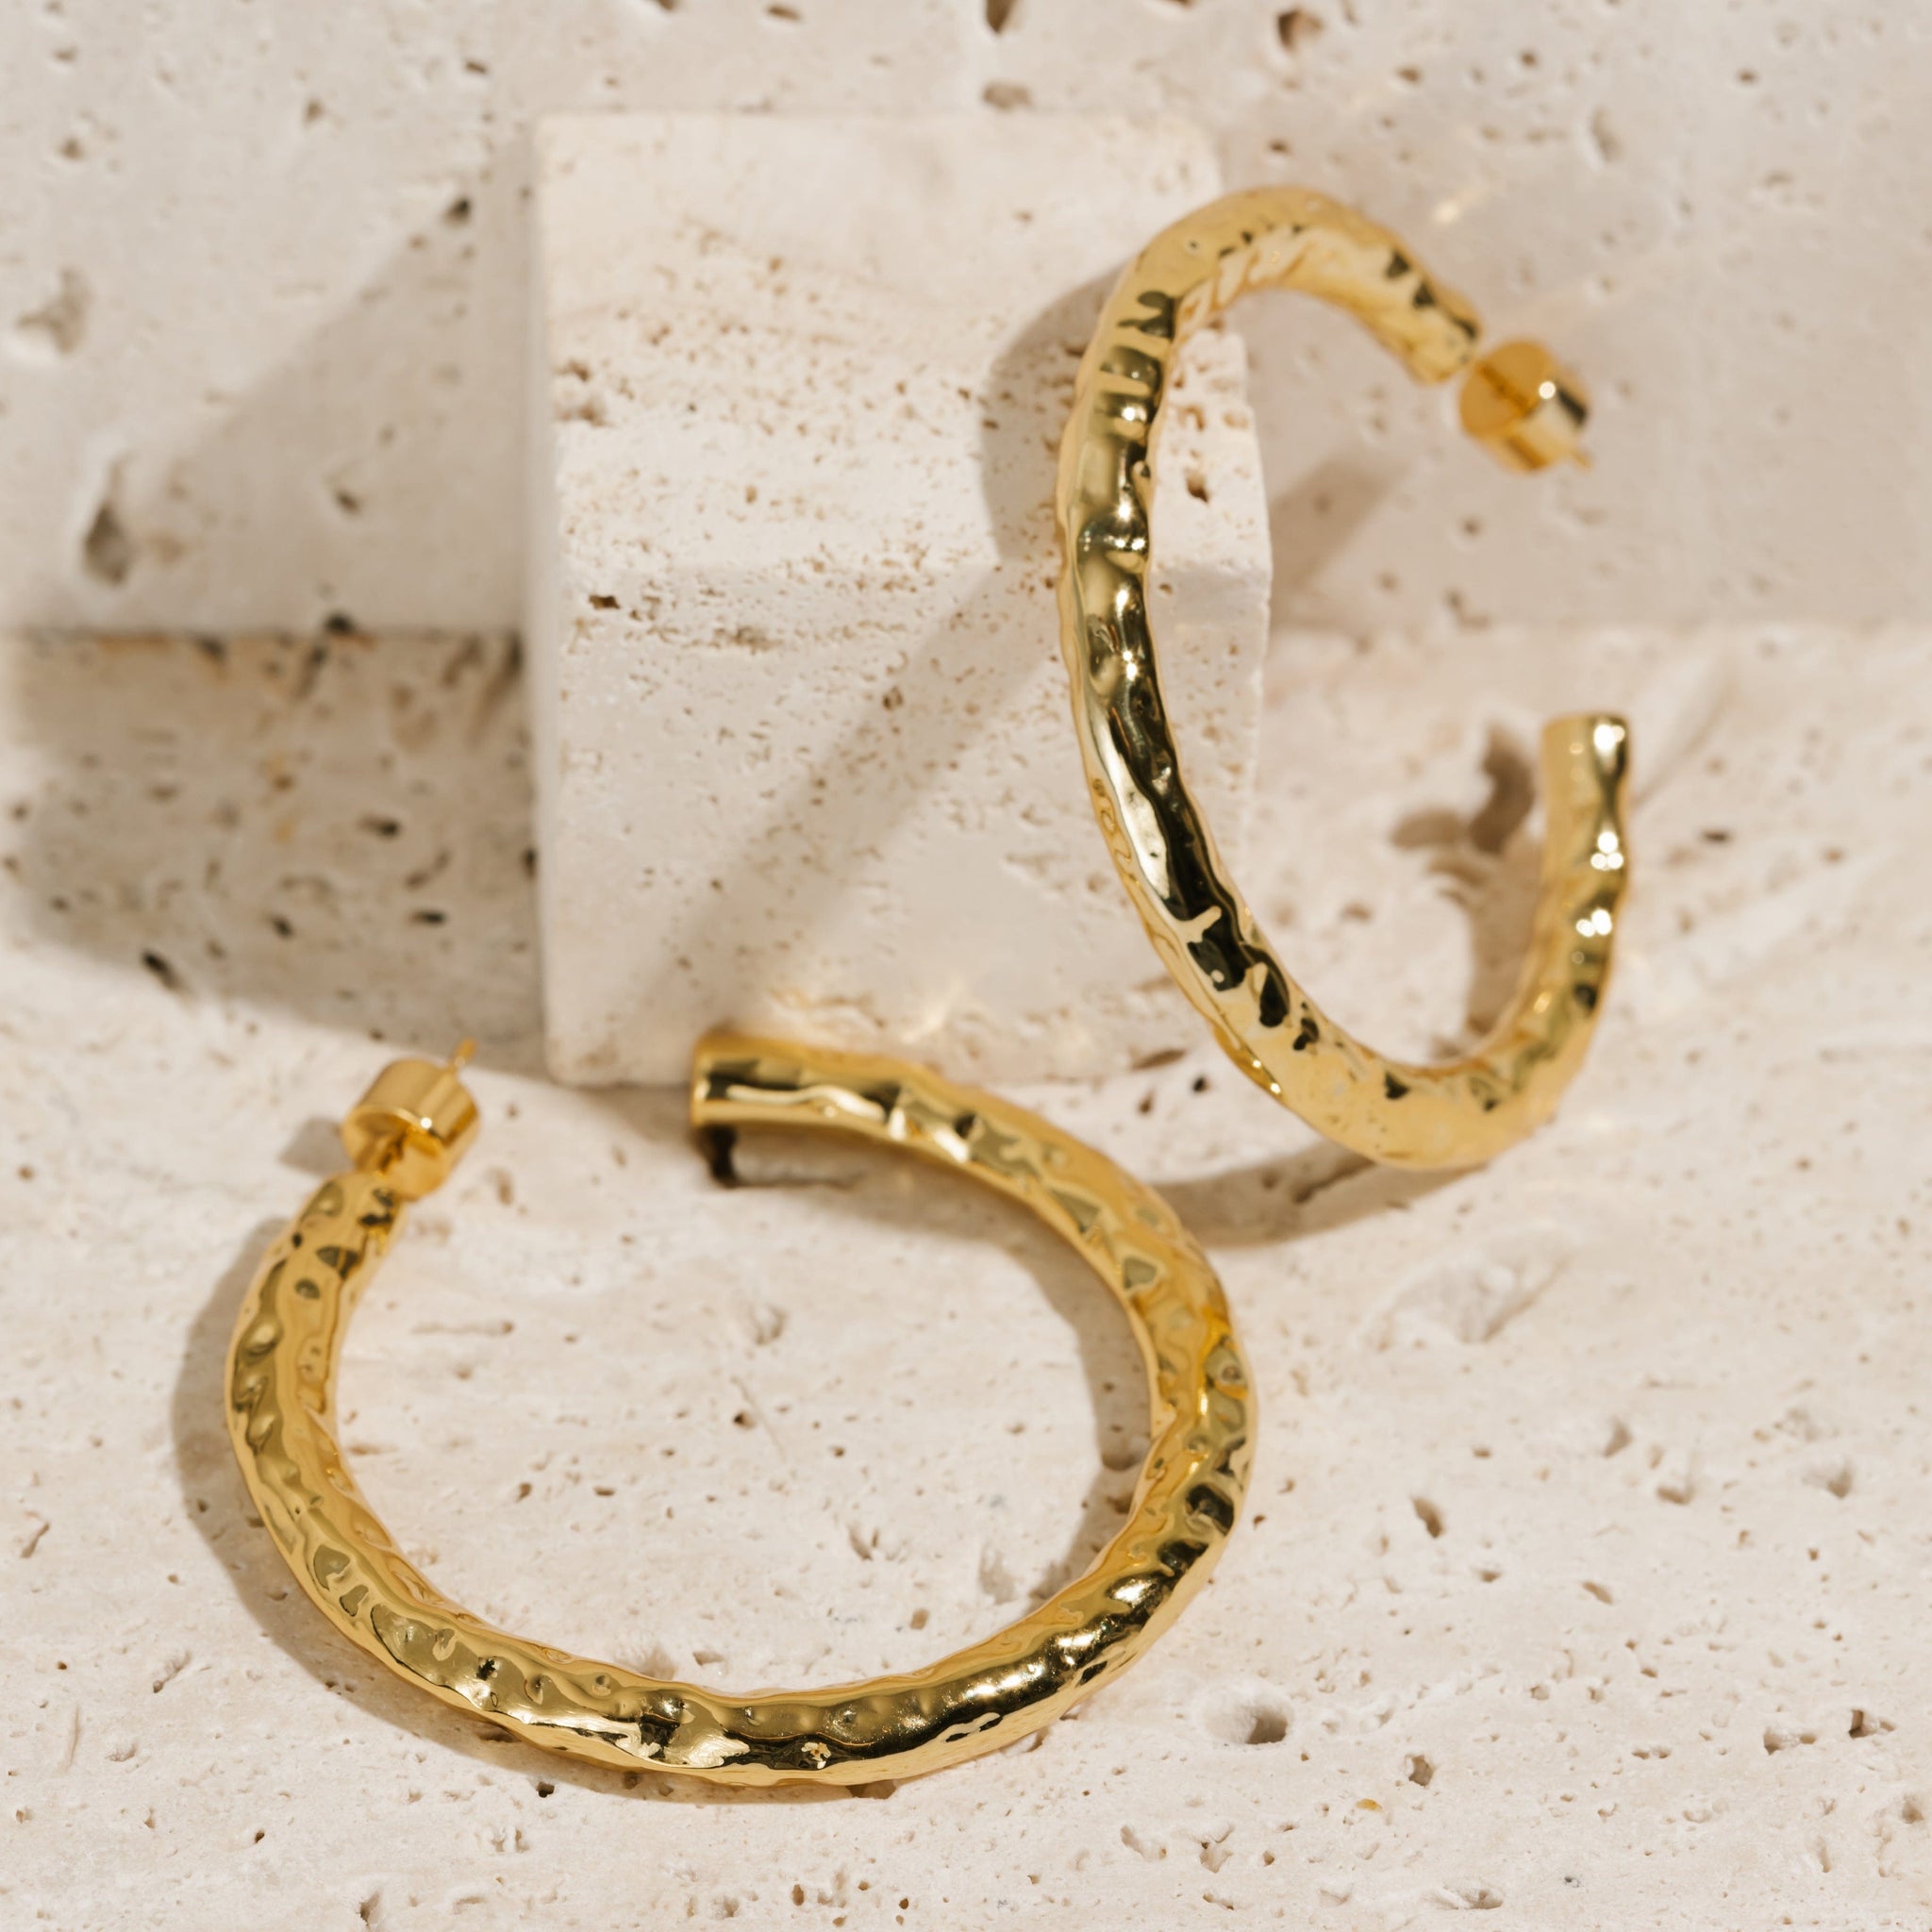  A pair of Marbella Hoop earrings is displayed on a stone slab, one earring laying on its side while the other is propped up. The various shades created by the hammered texture can be seen as the display light creates reflections and shadows on the open hoop earrings.